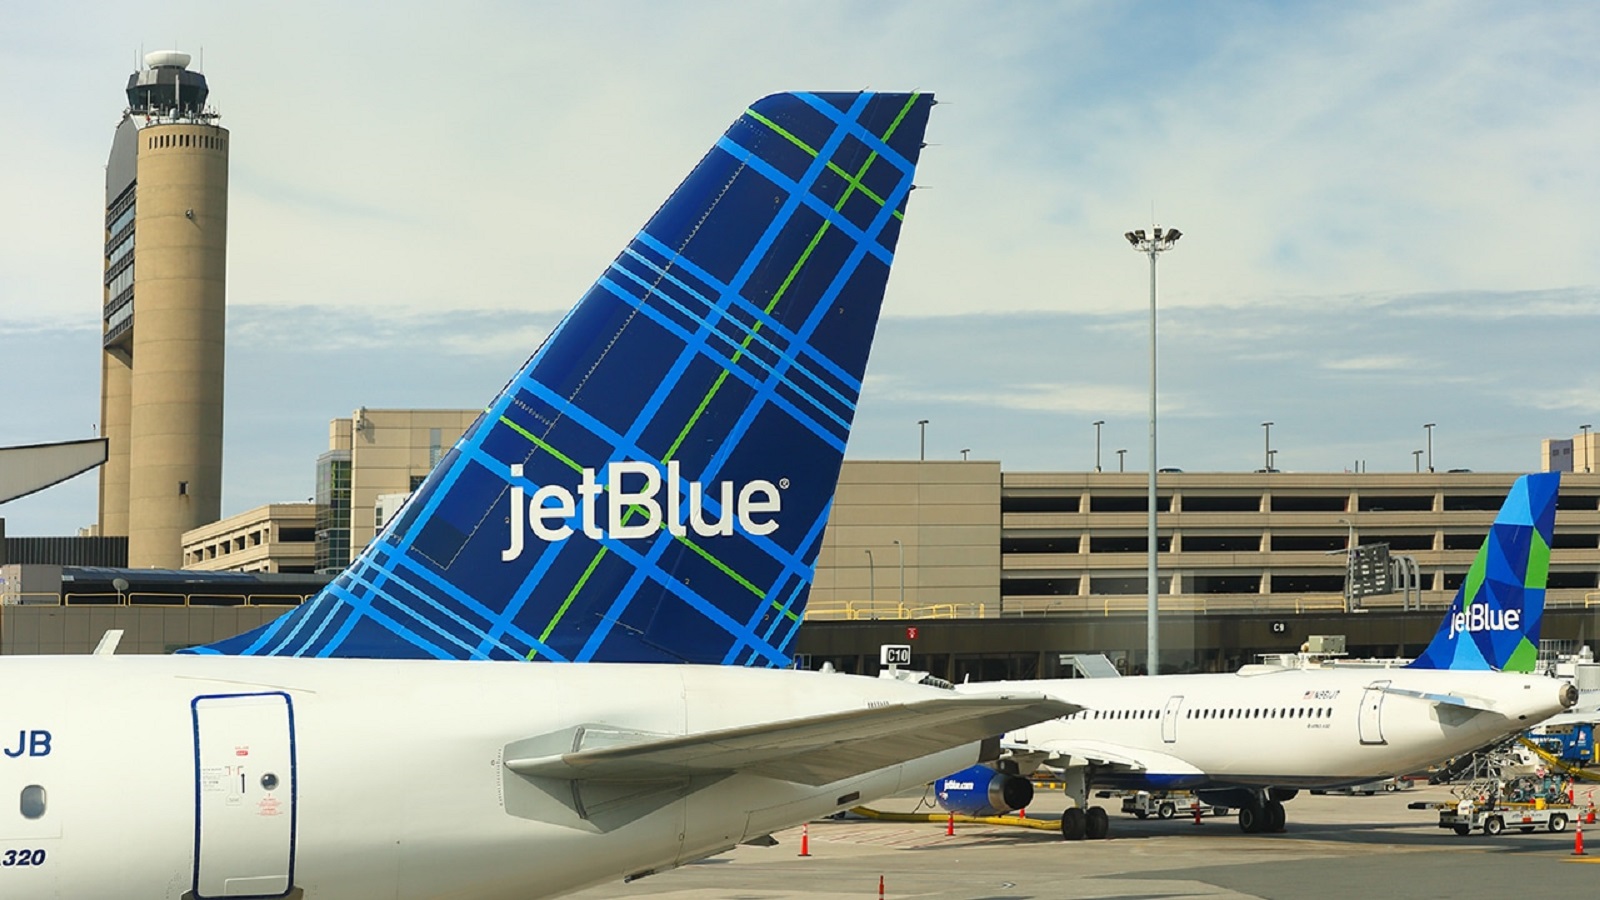 <p><span>Despite being a higher-cost carrier compared to Spirit, JetBlue has maintained a competitive edge by offering low-cost services compared to larger airlines. Its entry into new routes has historically pressured major airlines to reduce their prices.</span></p>